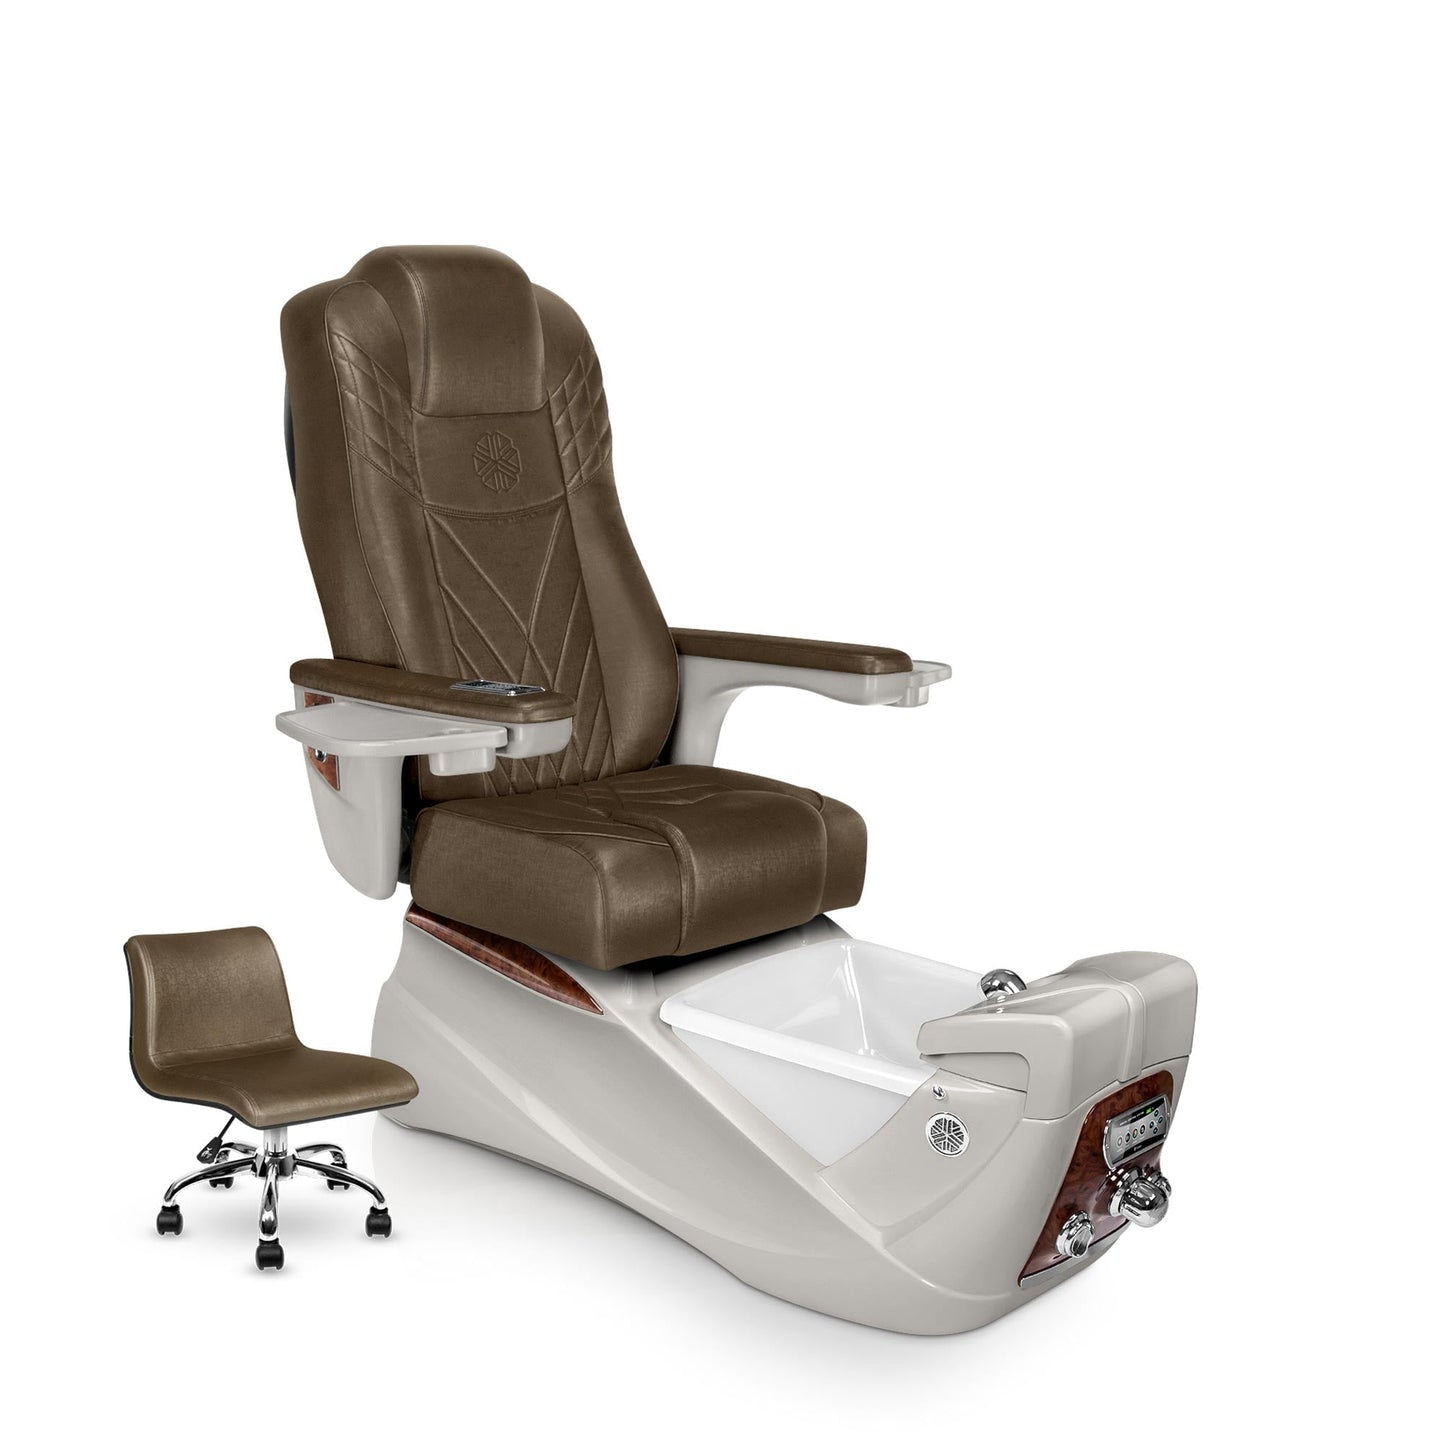 Lexor INFINITY pedicure chair with cola cushion and sandstone spa base